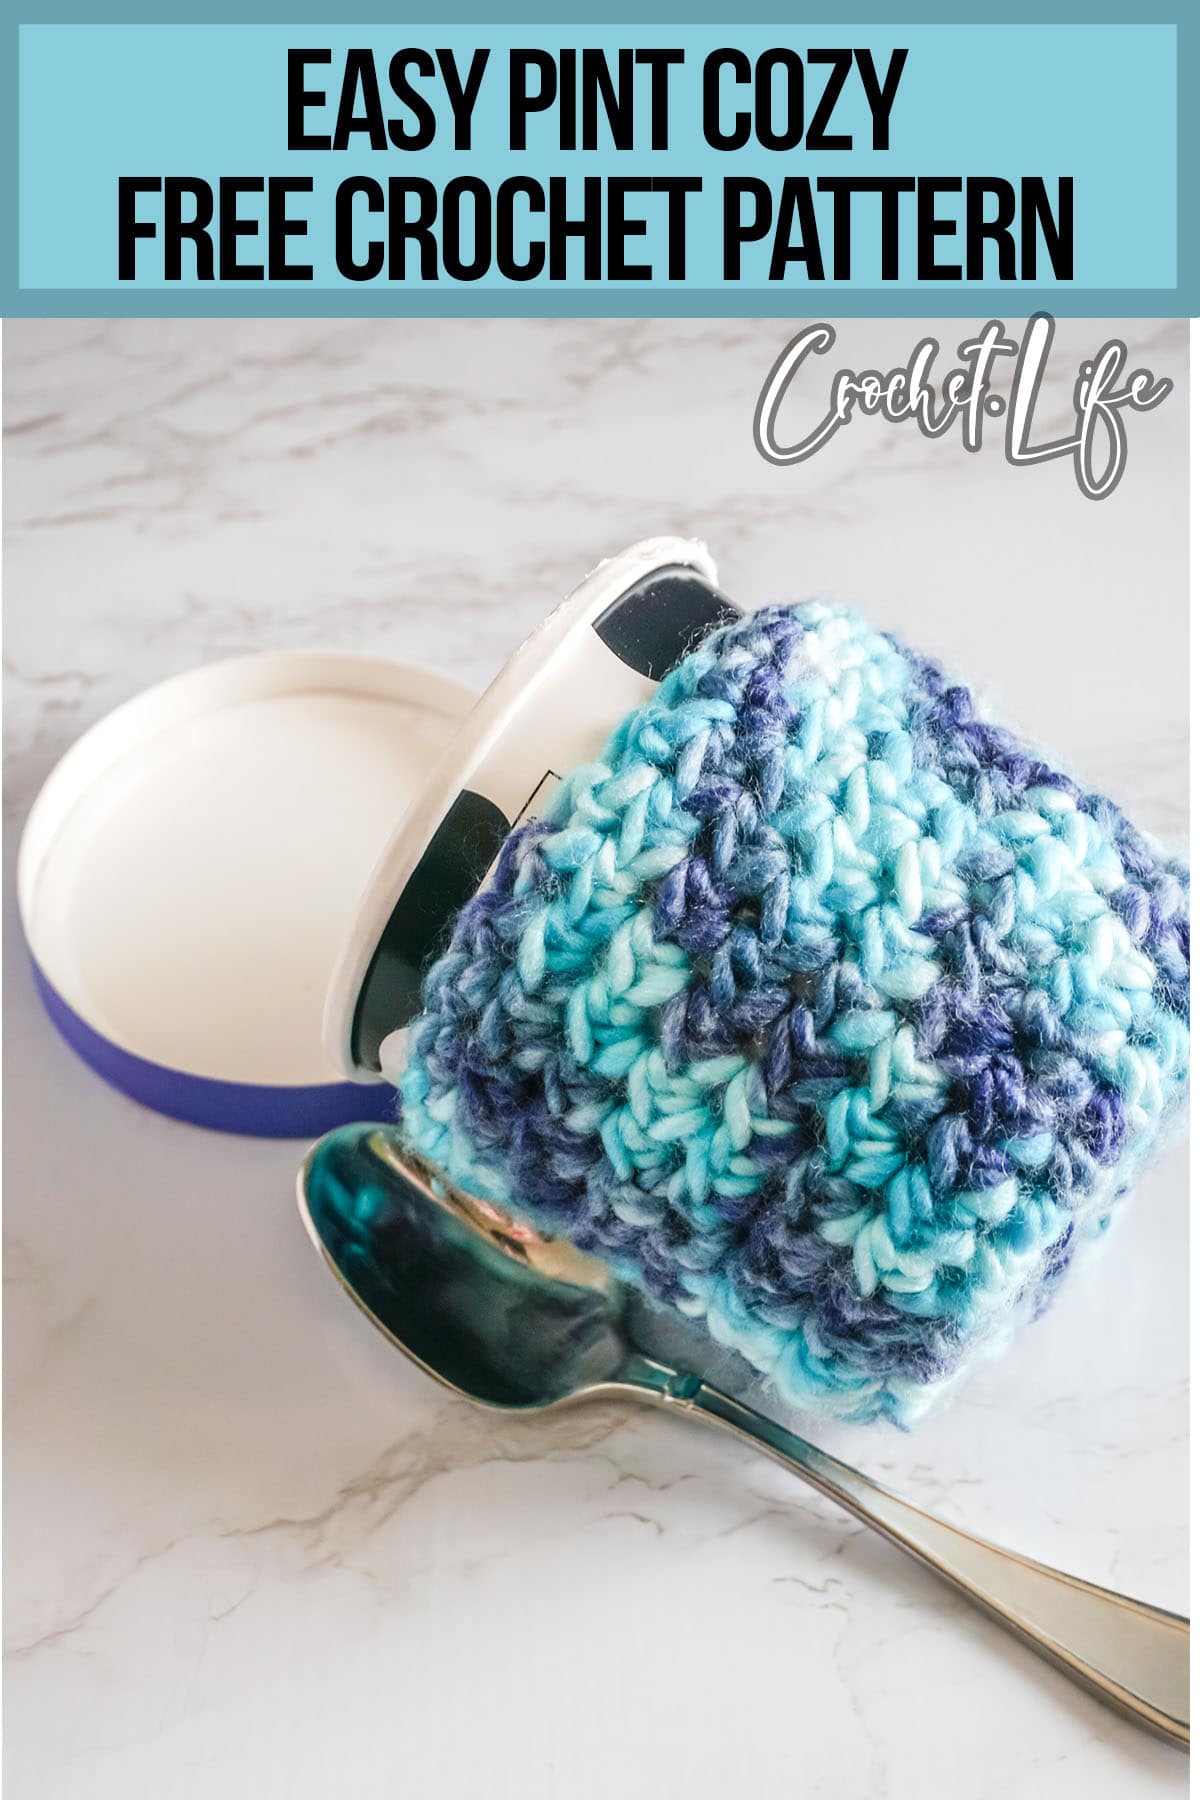 free ice cream cozy crochet pattern with text which reads pint cozy free crochet pattern